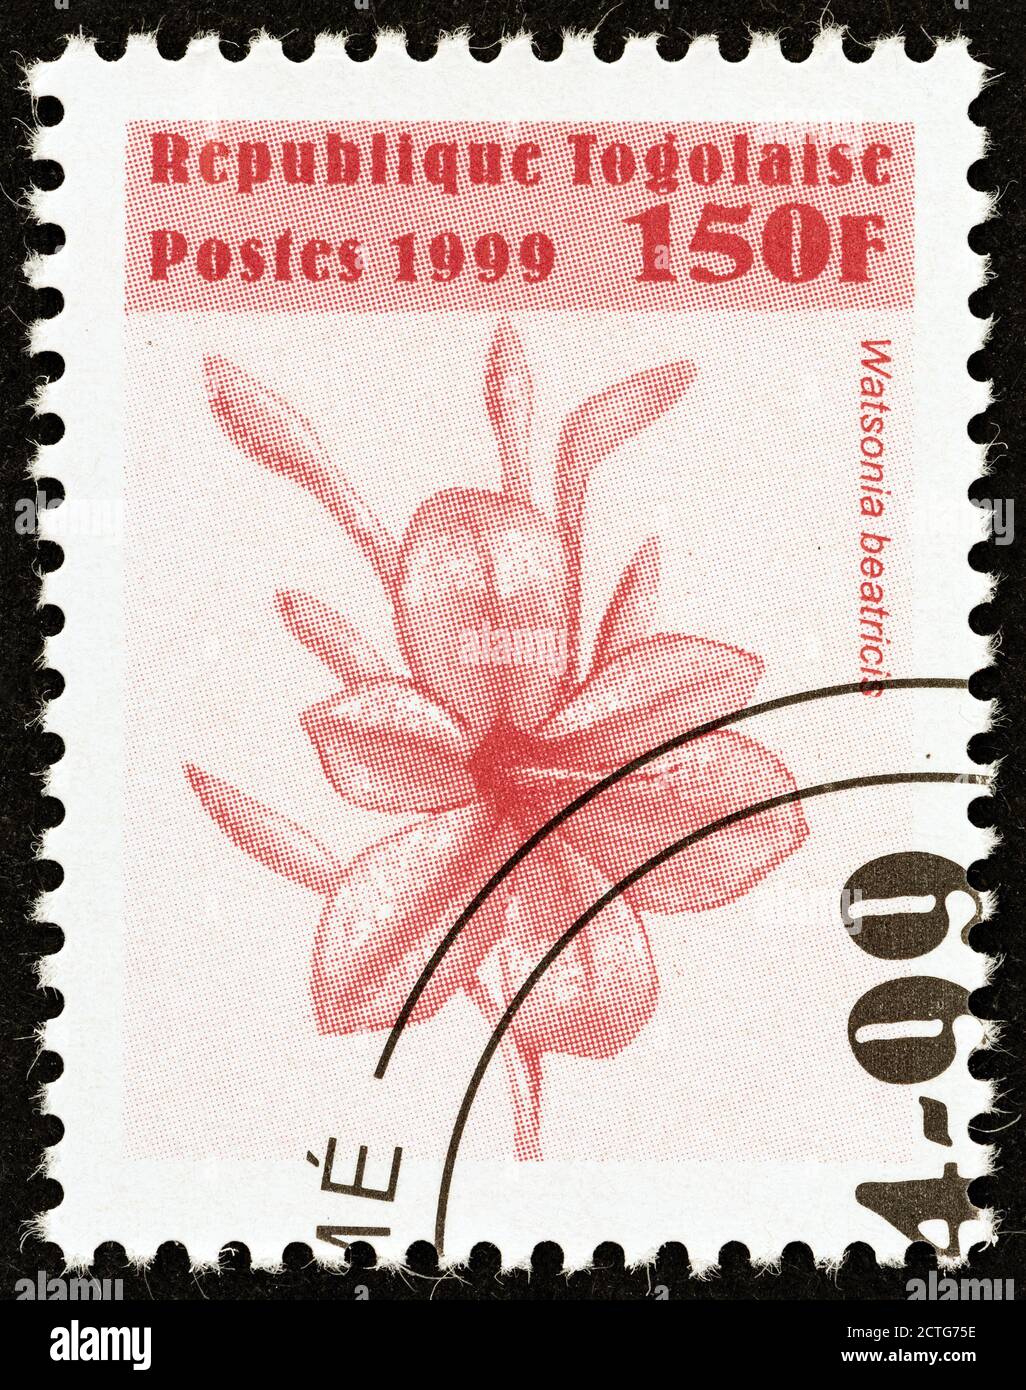 TOGO - CIRCA 1999: A stamp printed in Togo from the 'Flowers' issue shows Watsonia beatricis, circa 1999. Stock Photo